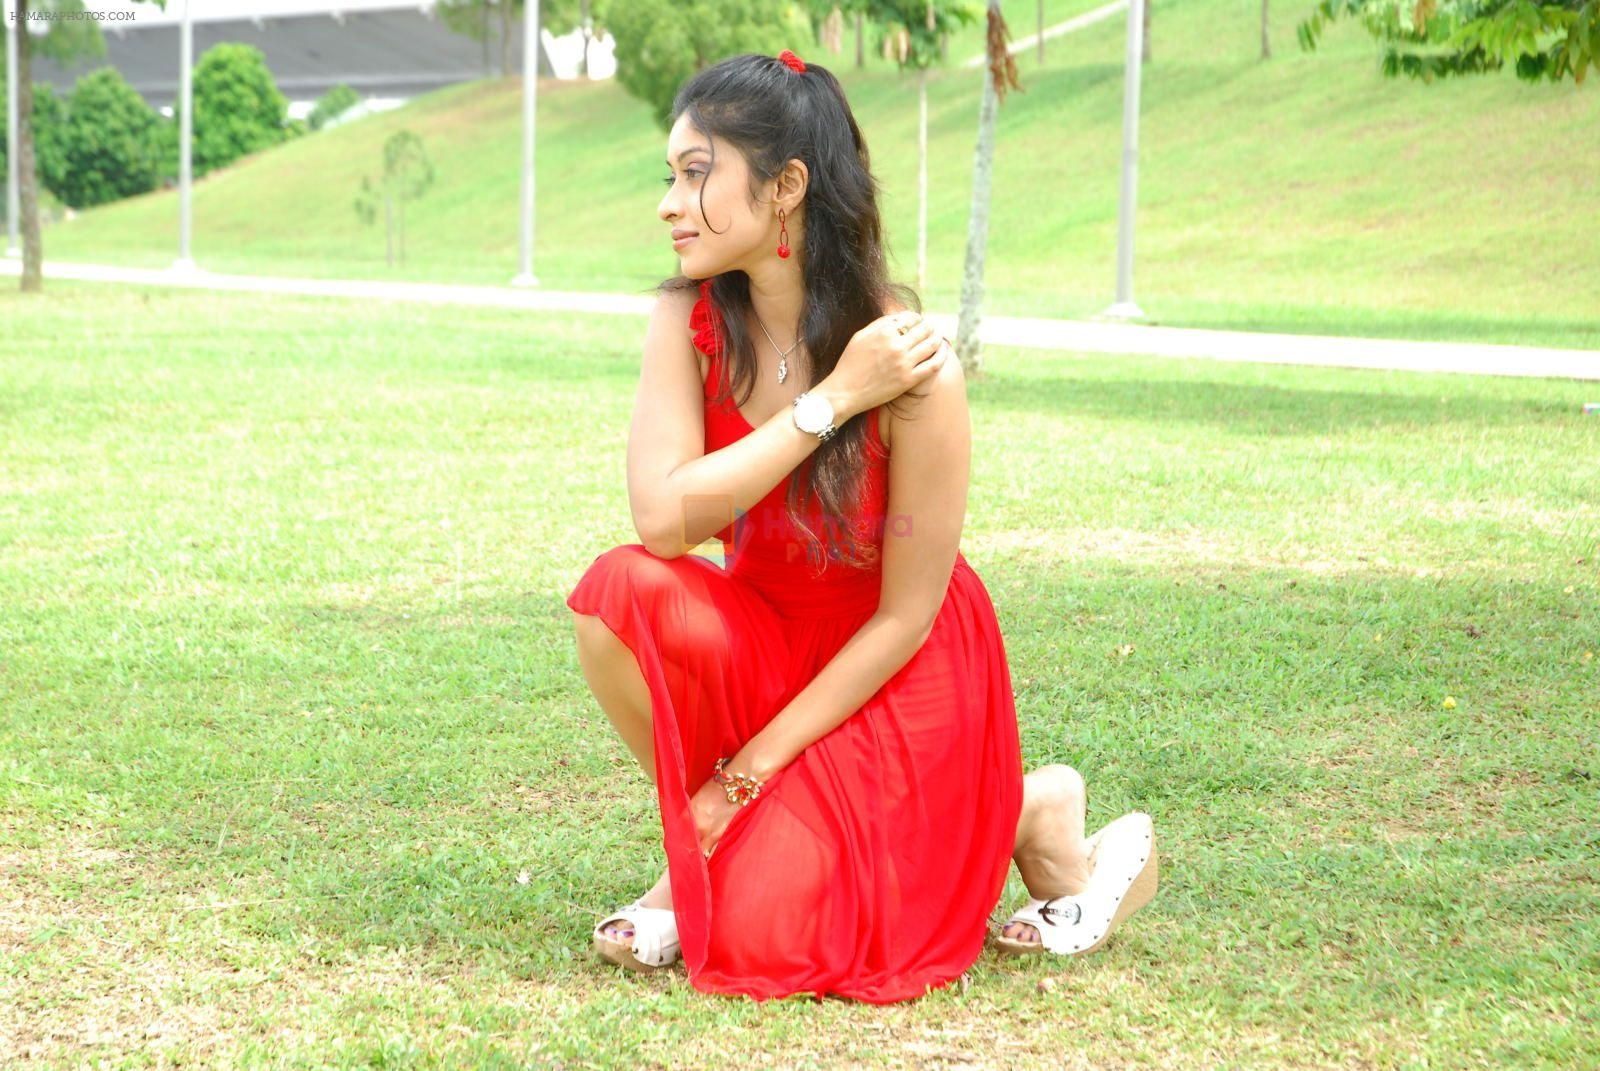 Payal Ghosh in a song shoot on October 25, 2010